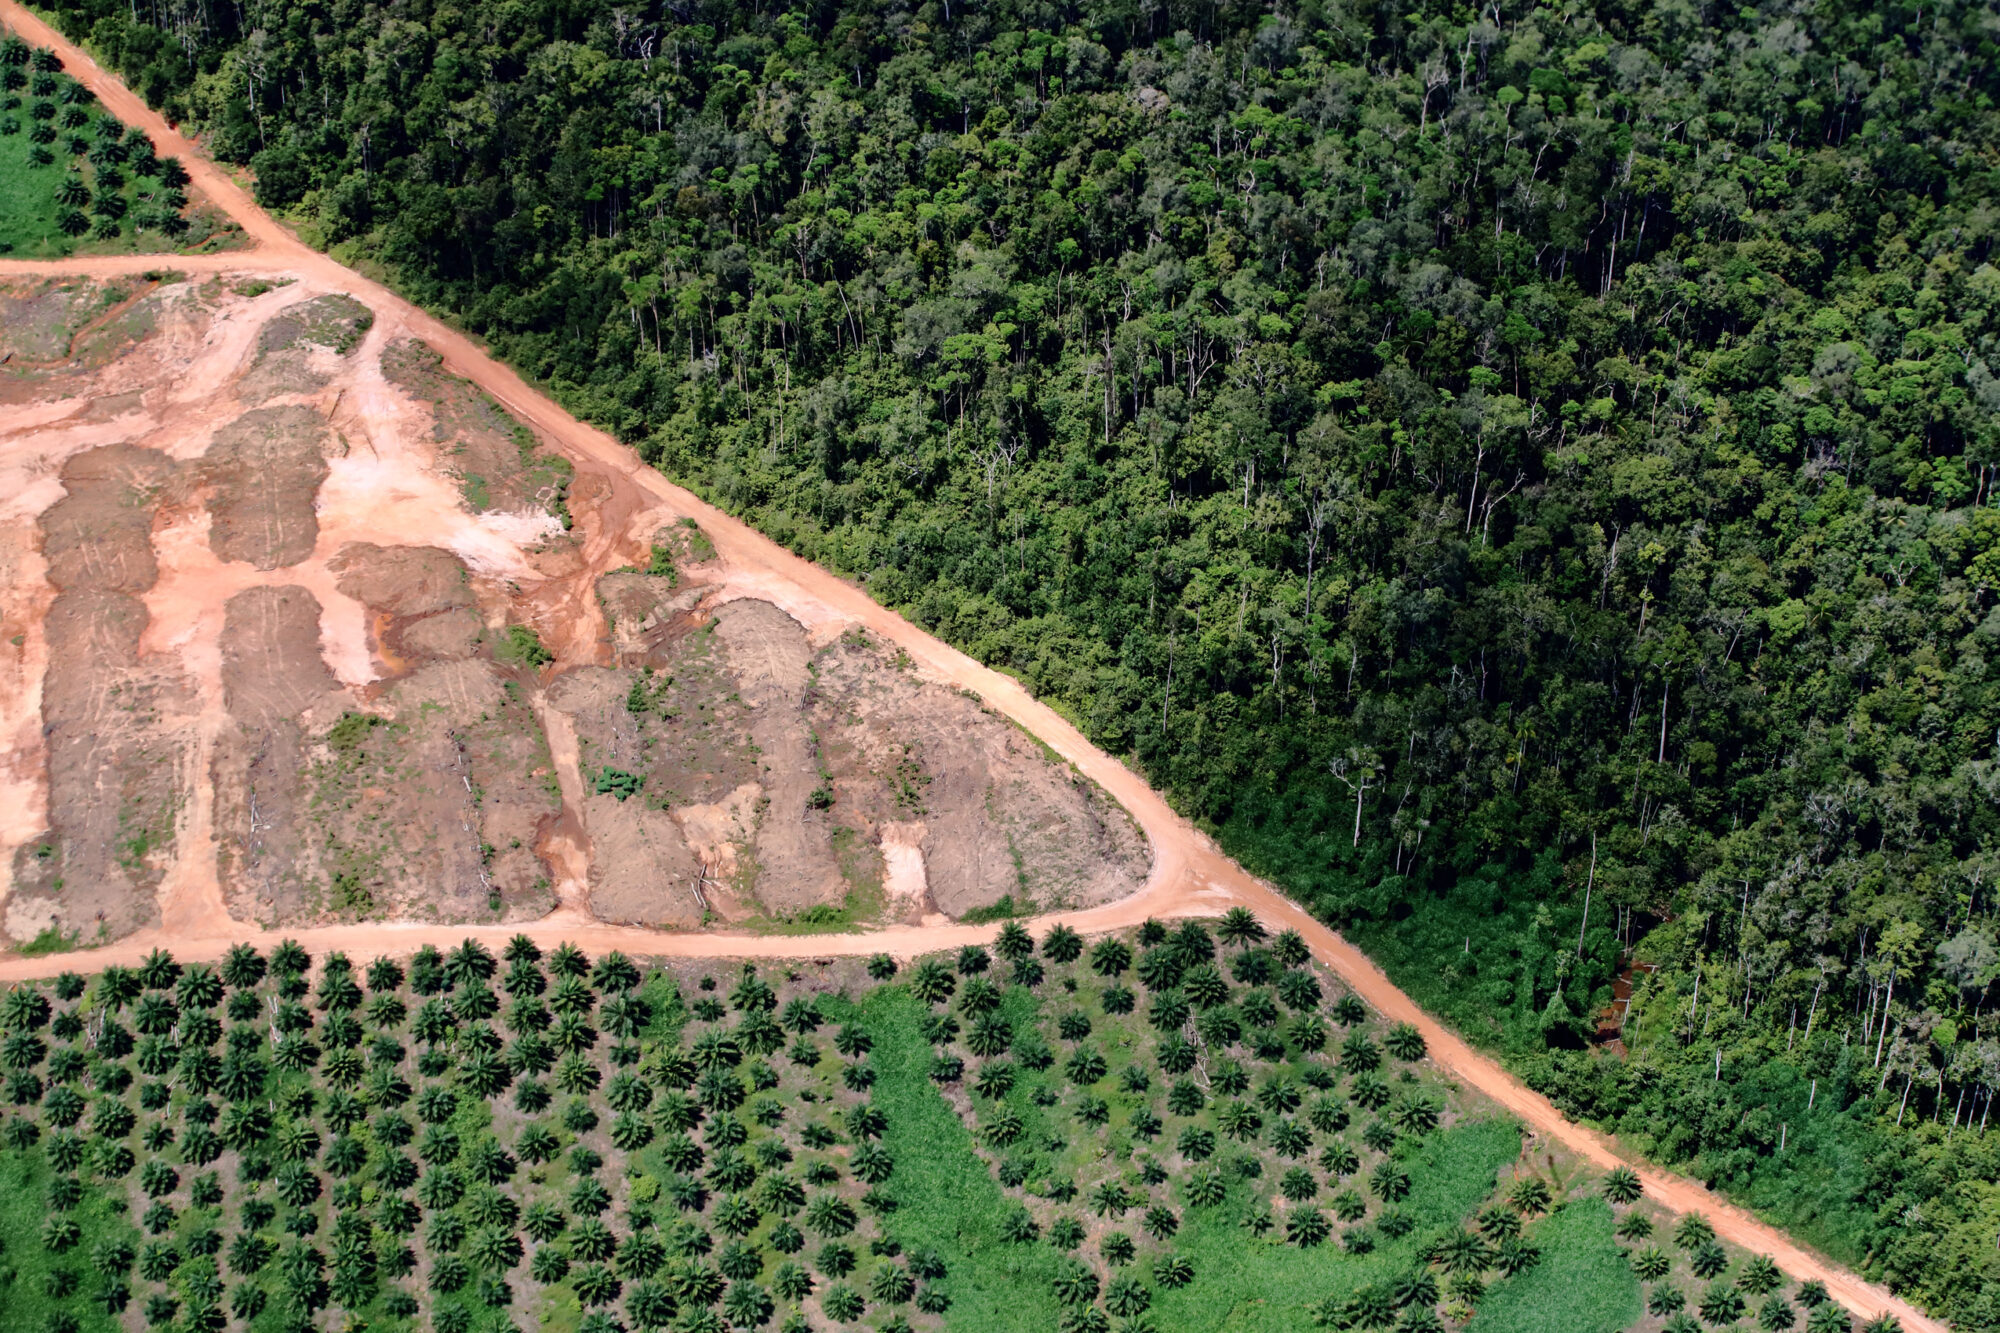 <p>The link between Chinese companies and overseas deforestation, as pictured here in Indonesia, has prompted calls for tighter regulation (Image: Paul Hilton)</p>